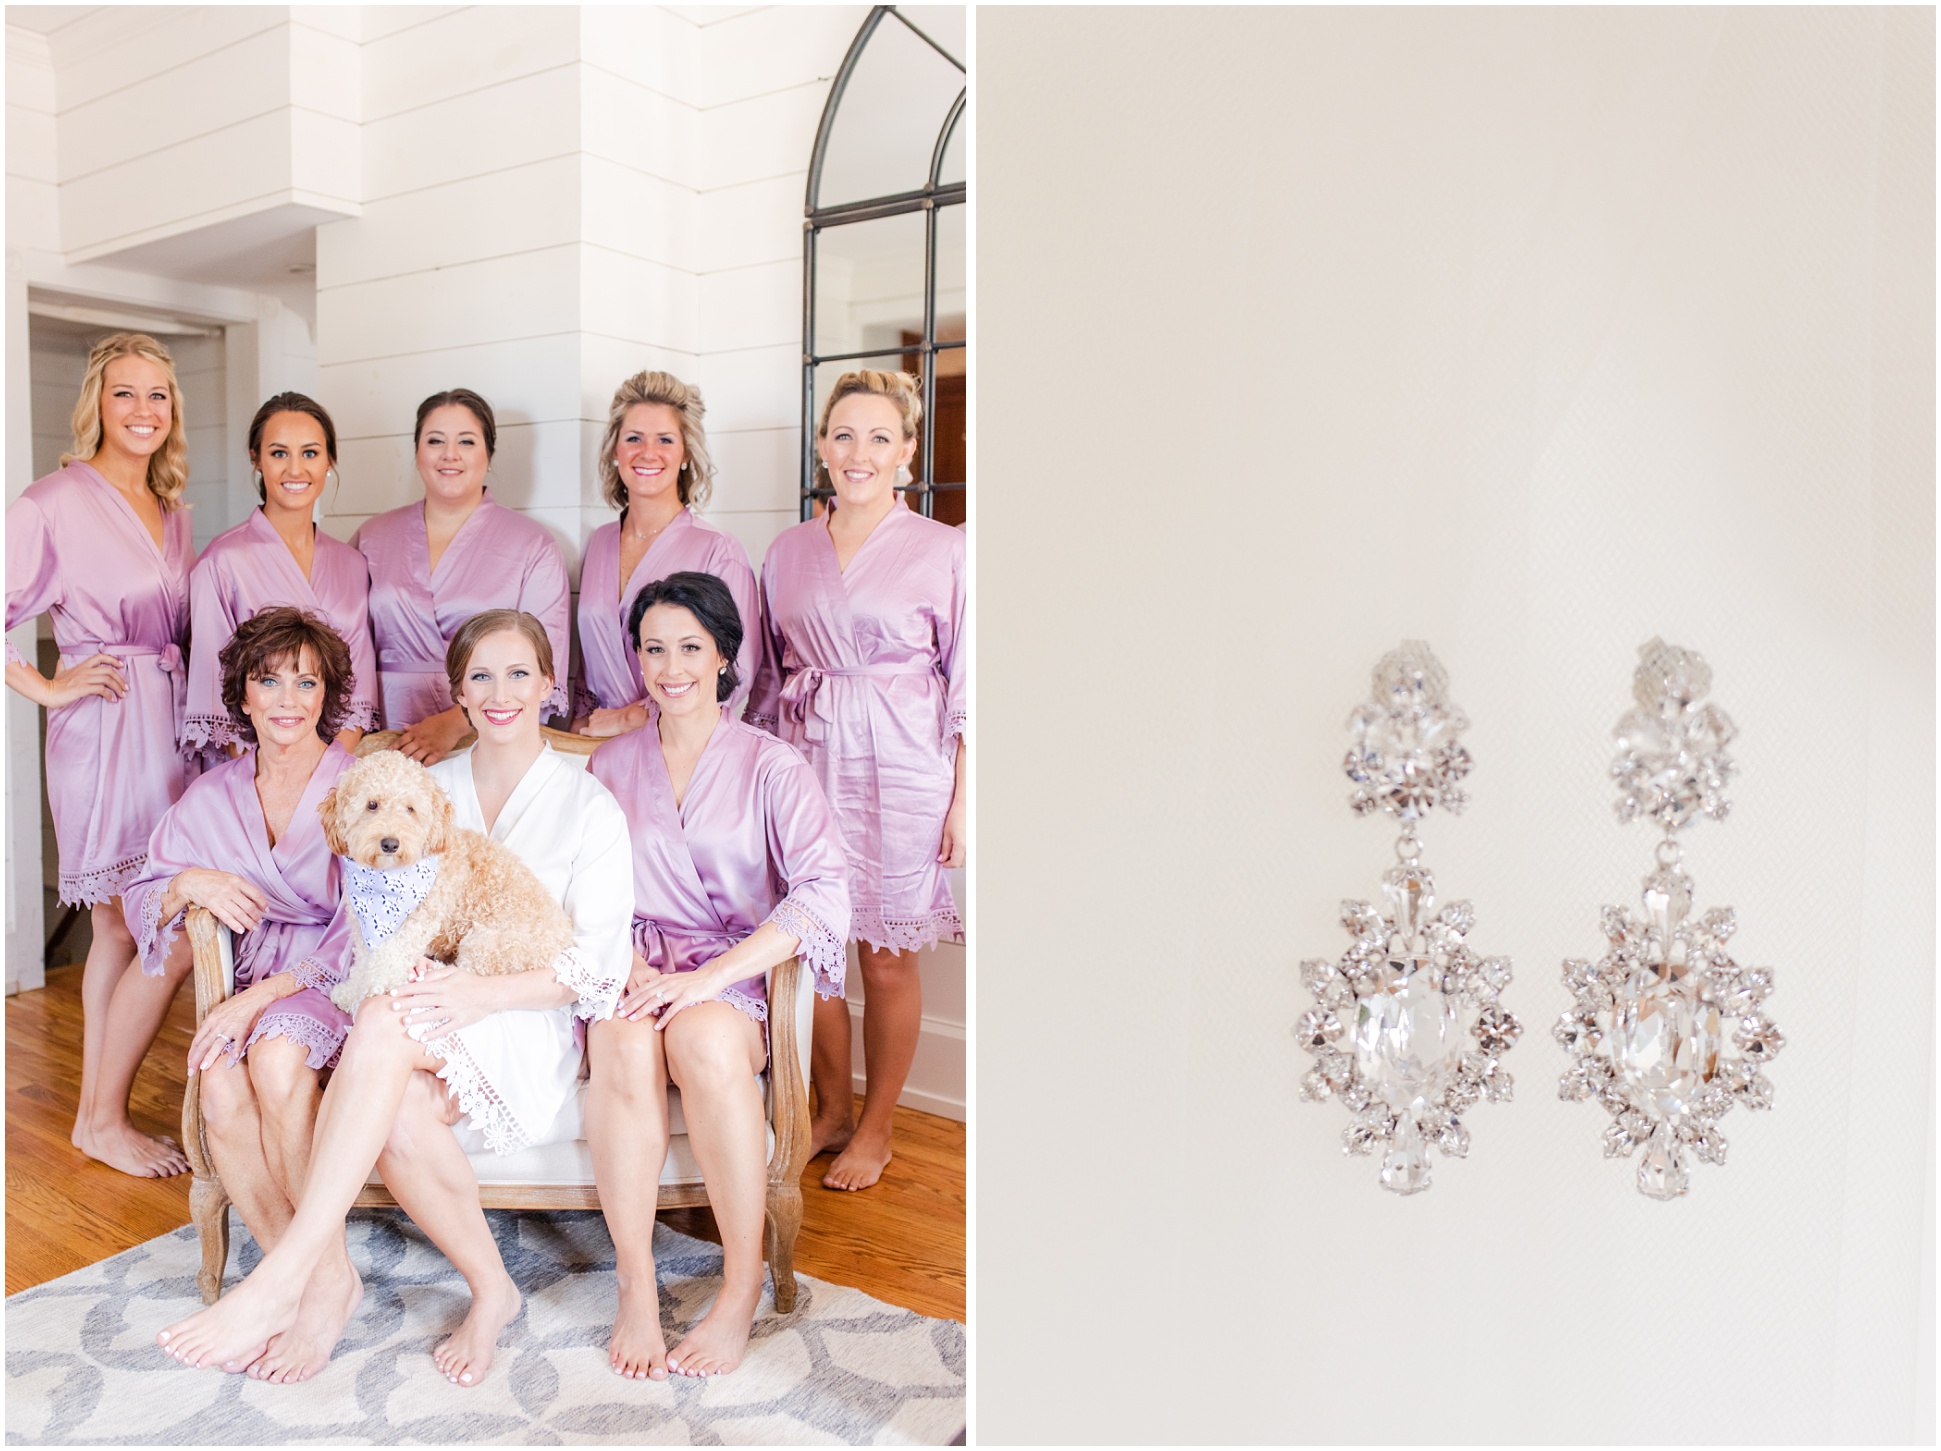 Bridal party in purple robes, Right: wedding day earrings